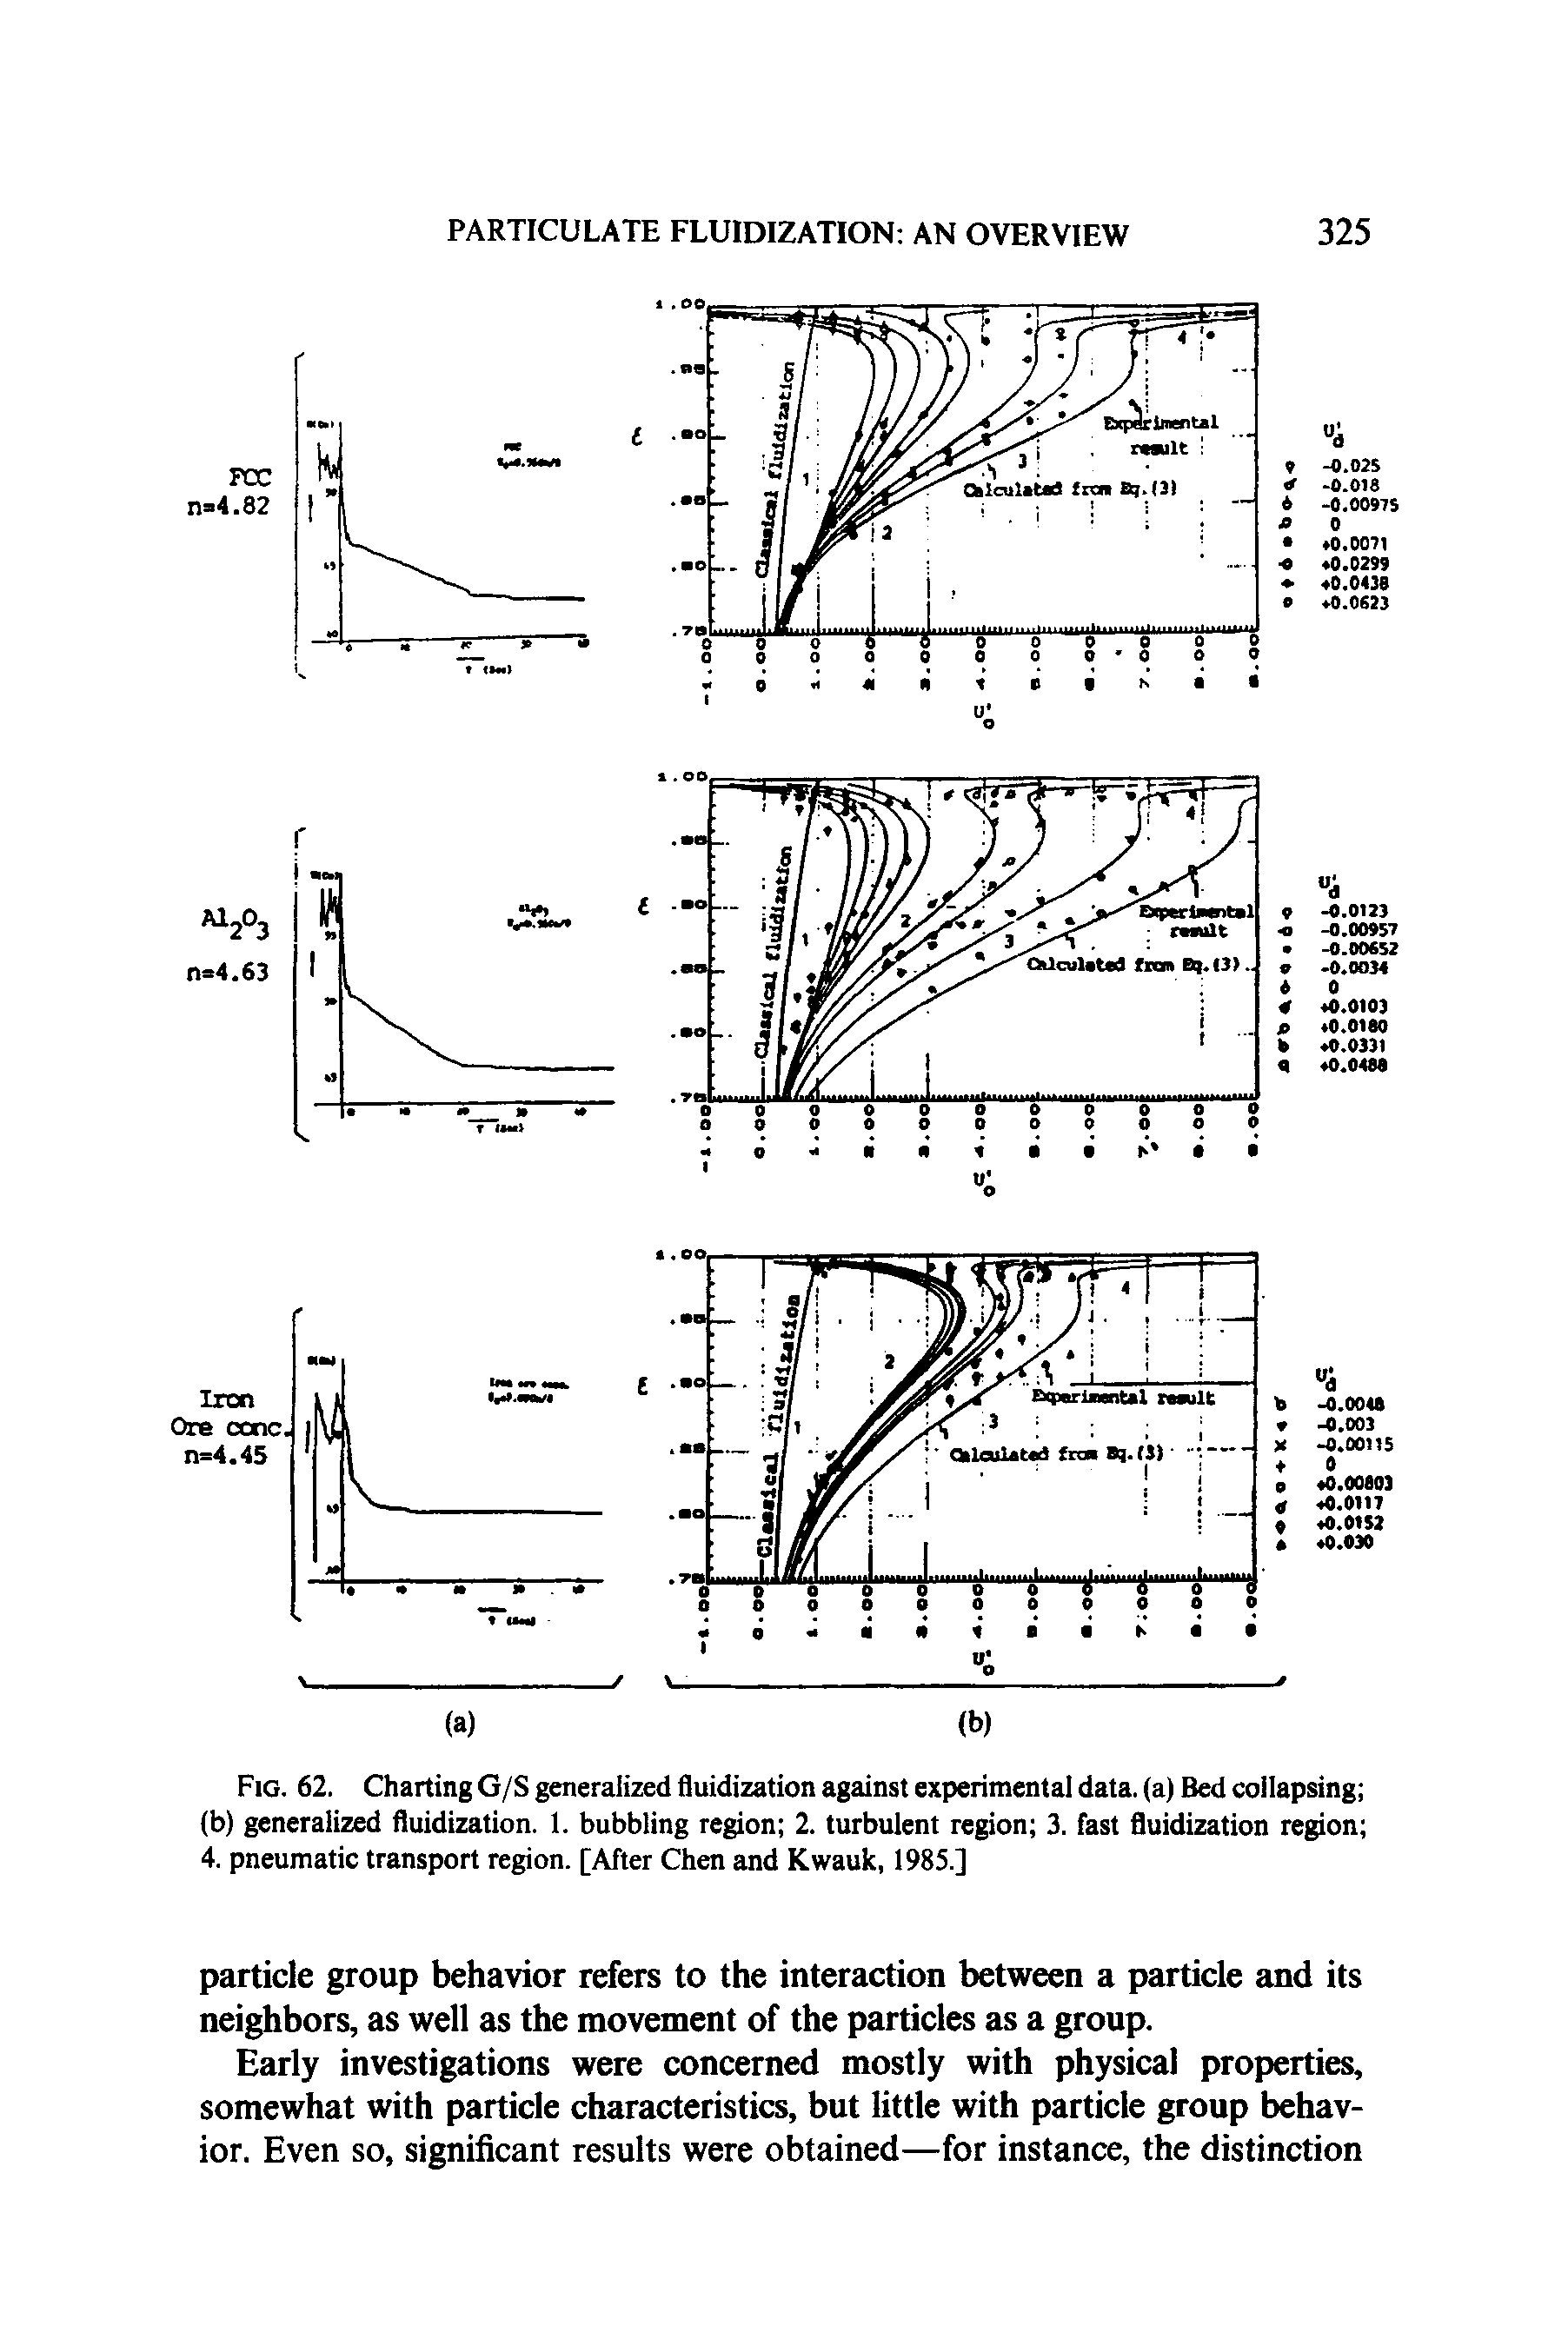 Fig. 62. Charting G/S generalized fluidization against experimental data, (a) Bed collapsing (b) generalized fluidization. 1. bubbling region 2. turbulent region 3. fast fluidization region 4. pneumatic transport region. [After Chen and Kwauk, 1985.]...